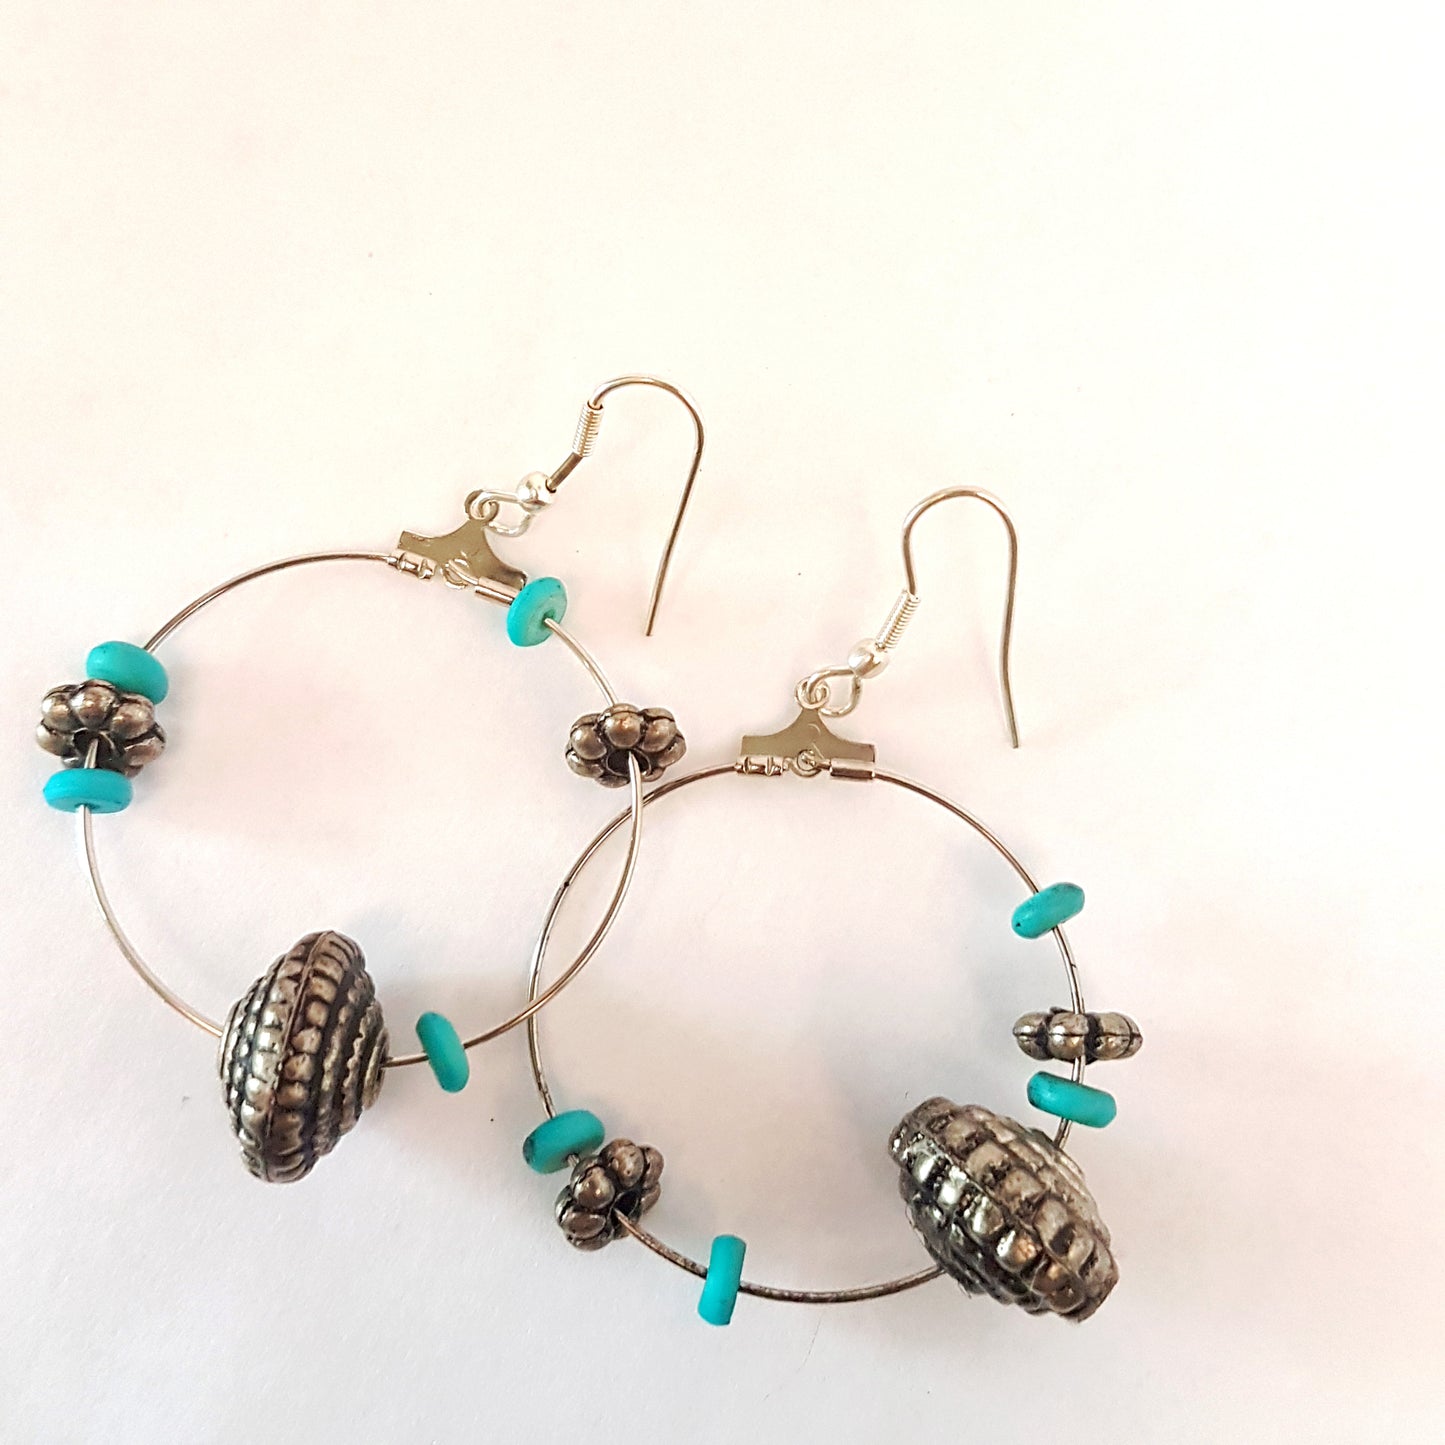 Silver hoop earrings with engraved vintage pewter beads & turquoise stones.